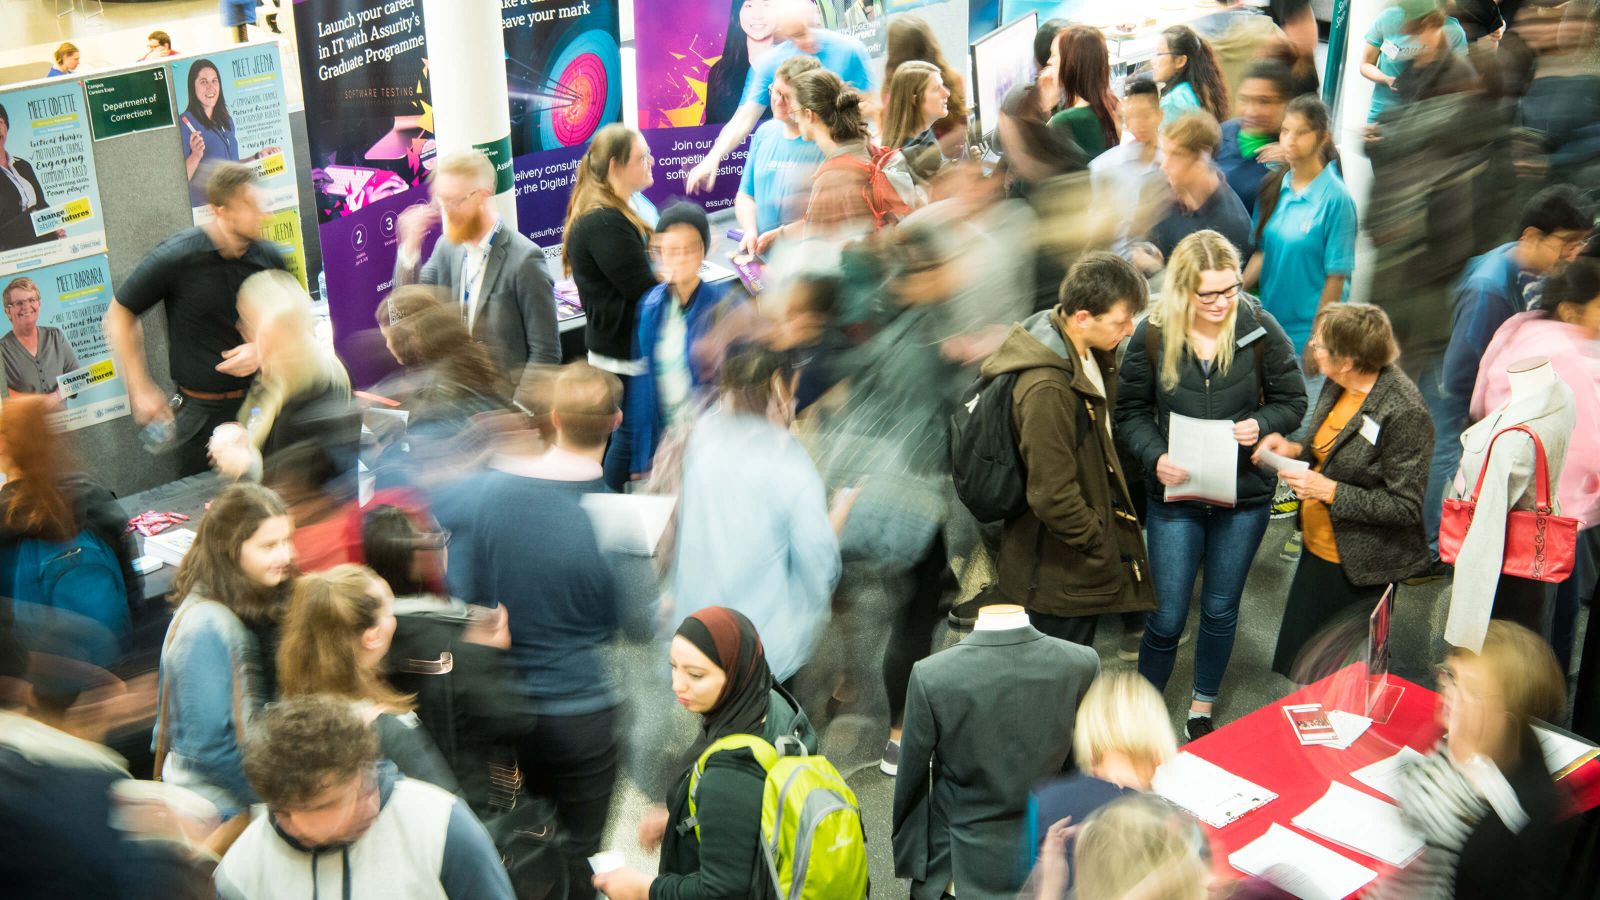 Blurred top-down photograph of students at a crowded careers expo with tables and banners